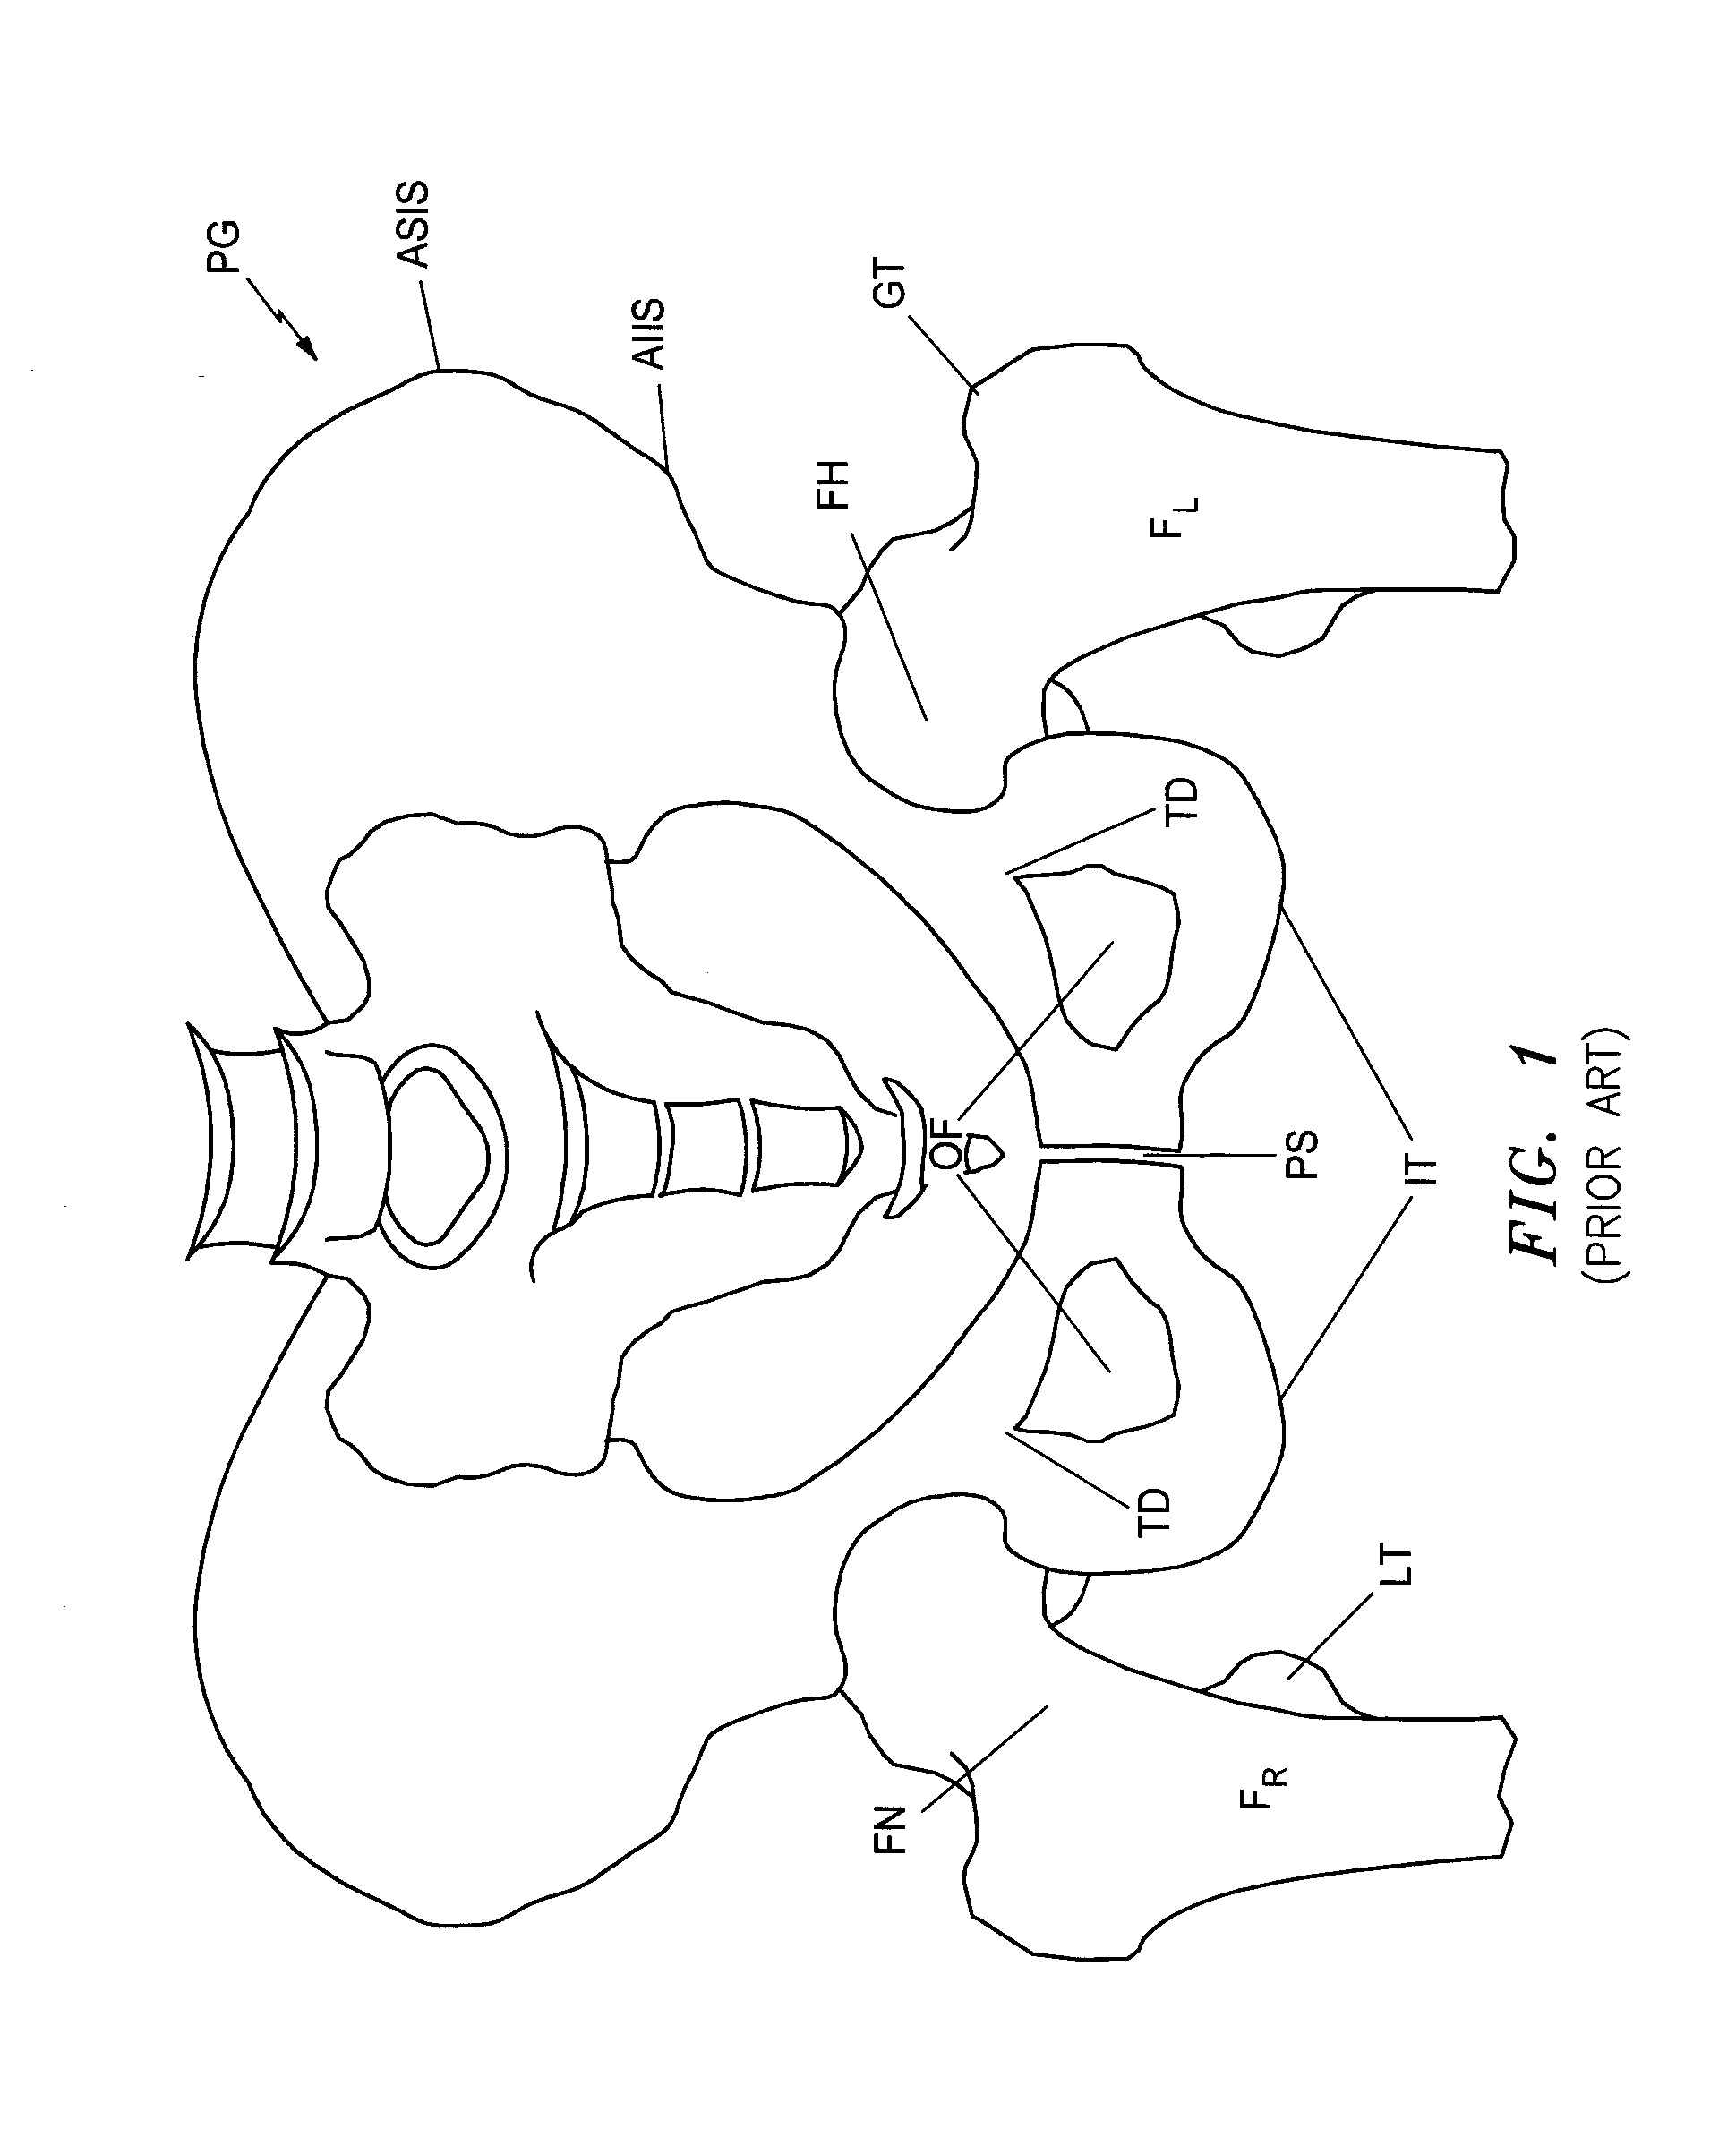 Systems and Methods for Intra-Operative Image Analysis